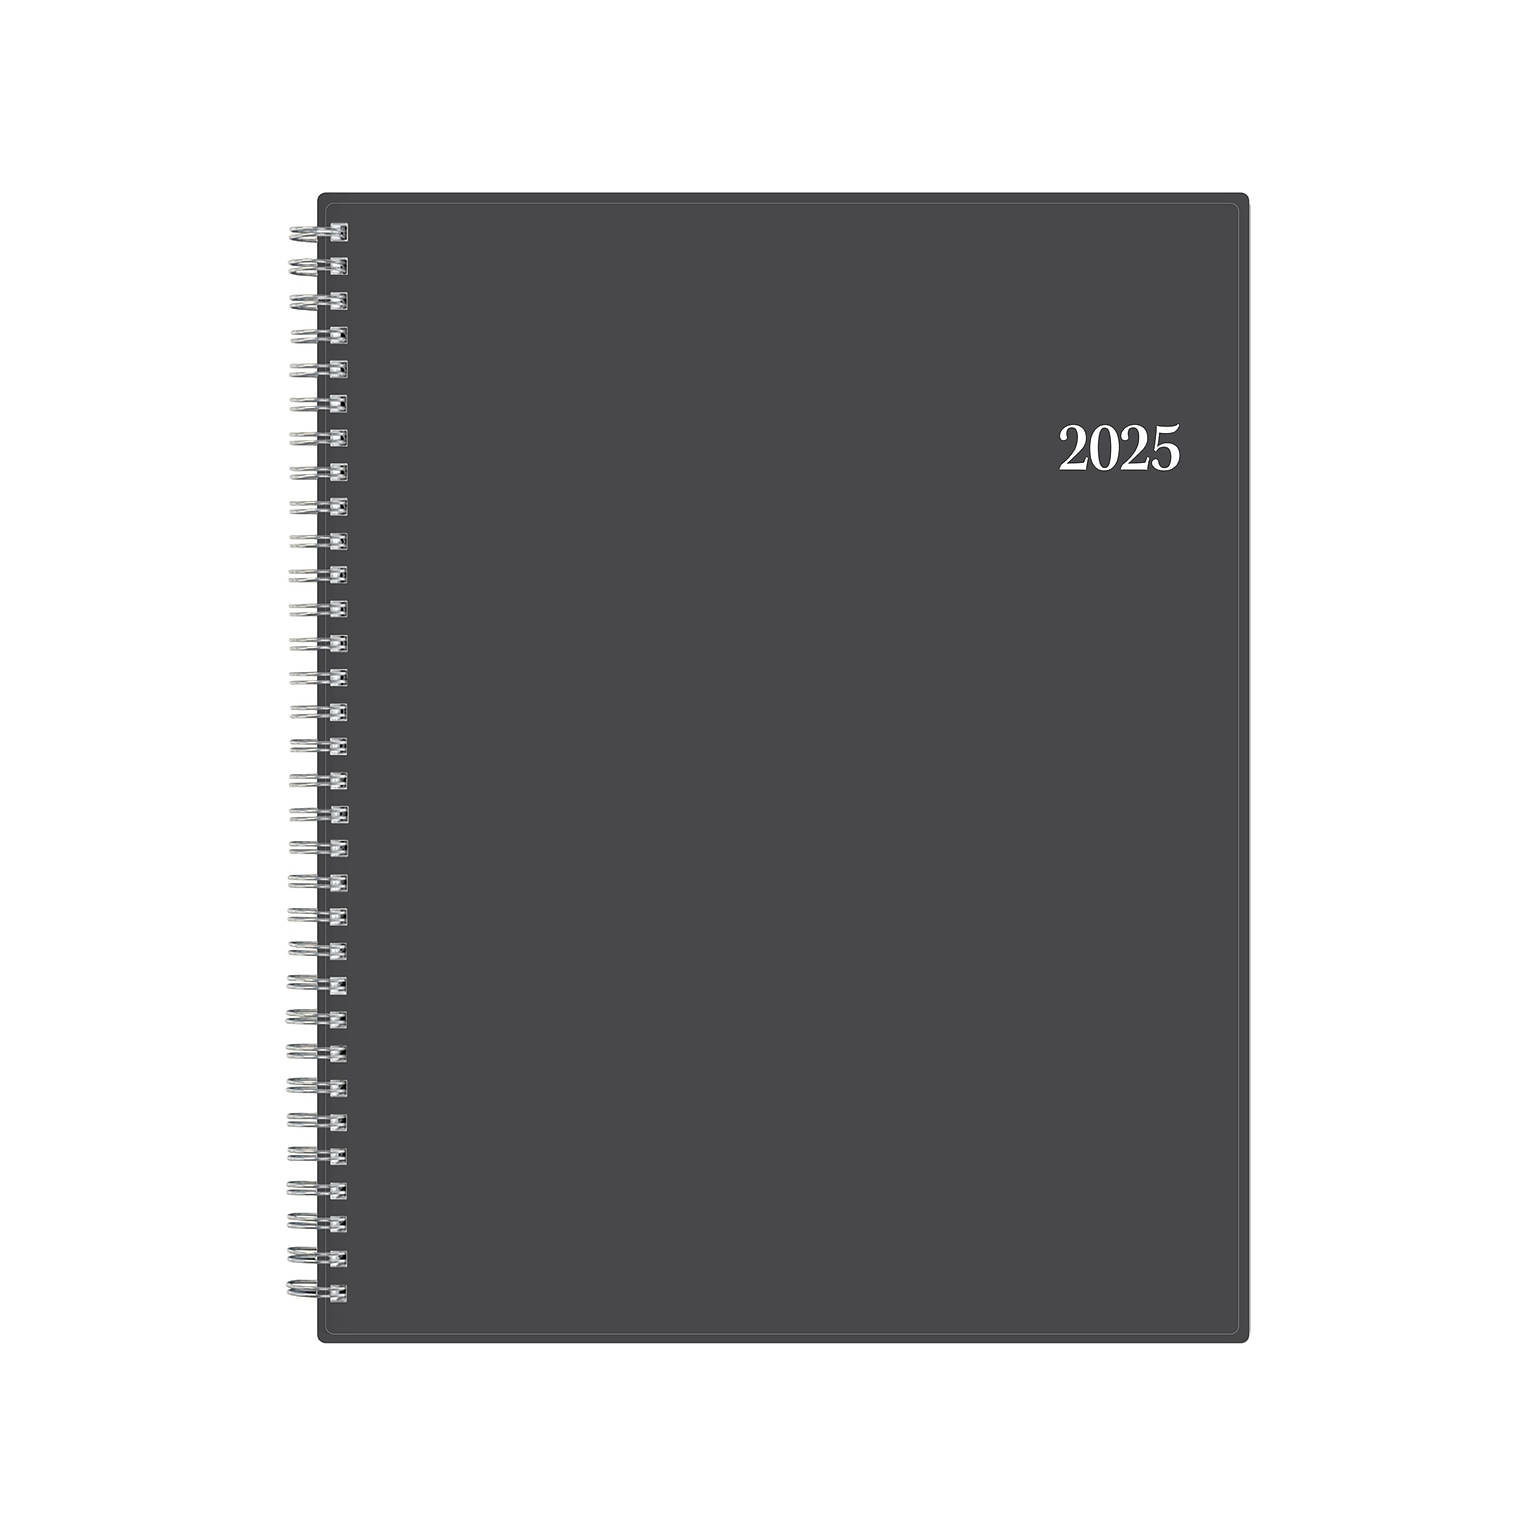 2025 Blue Sky Passages 8.5 x 11 Weekly & Monthly Appointment Book, Plastic Cover, Charcoal Gray (100009-25)